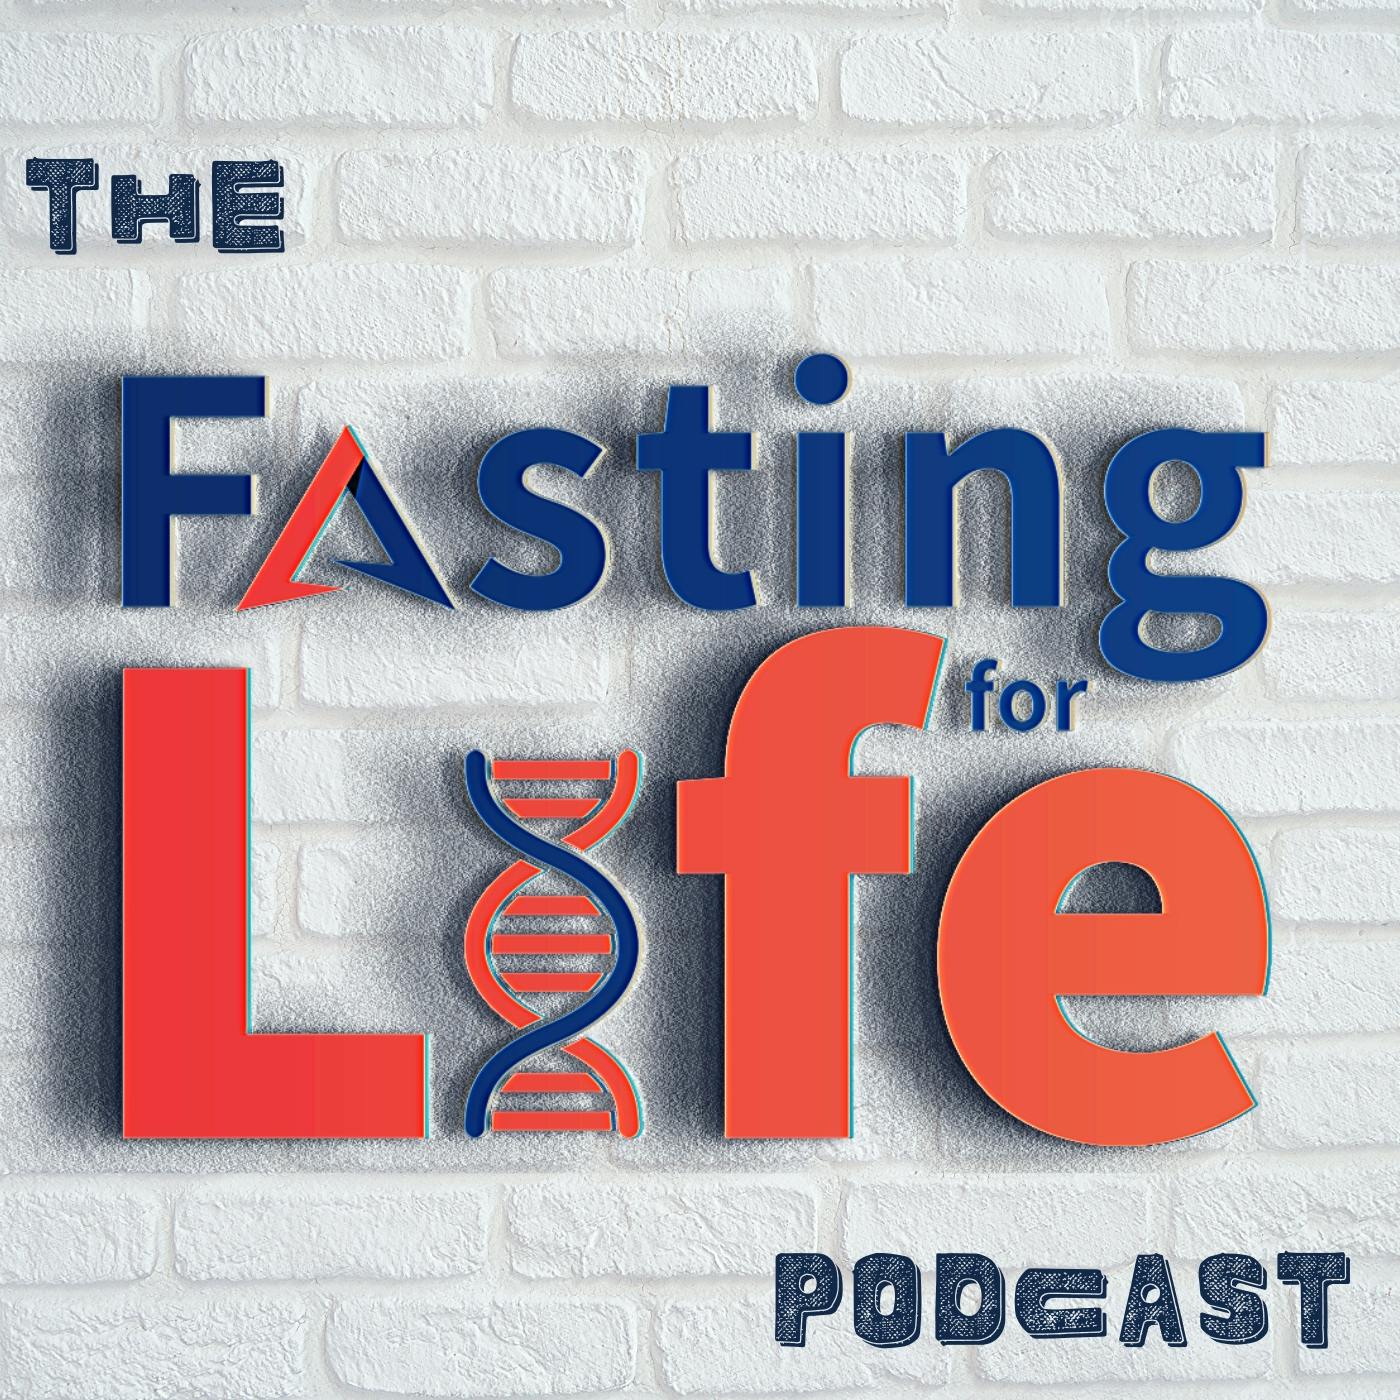 Ep. 46 - What to eat when fasting | Do low carb diets stop working? | Is the Mediterranean diet healthy? | Meal plans to lower insulin, increase metabolism, and control blood sugar with keto, carnivor